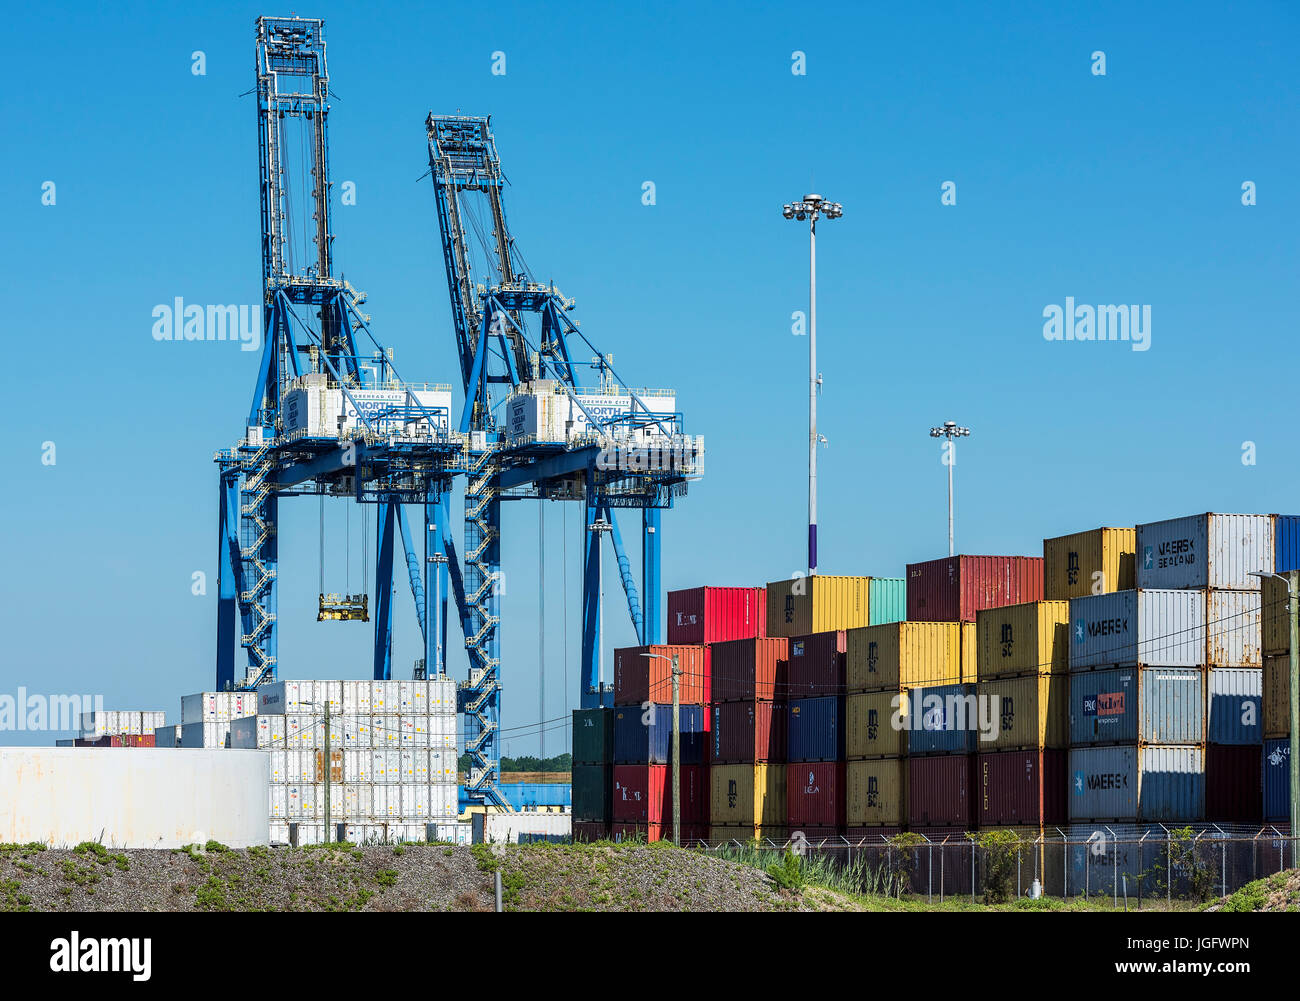 Cargo cranes and shipping containers, Wilmington, North Carolina, USA. Stock Photo